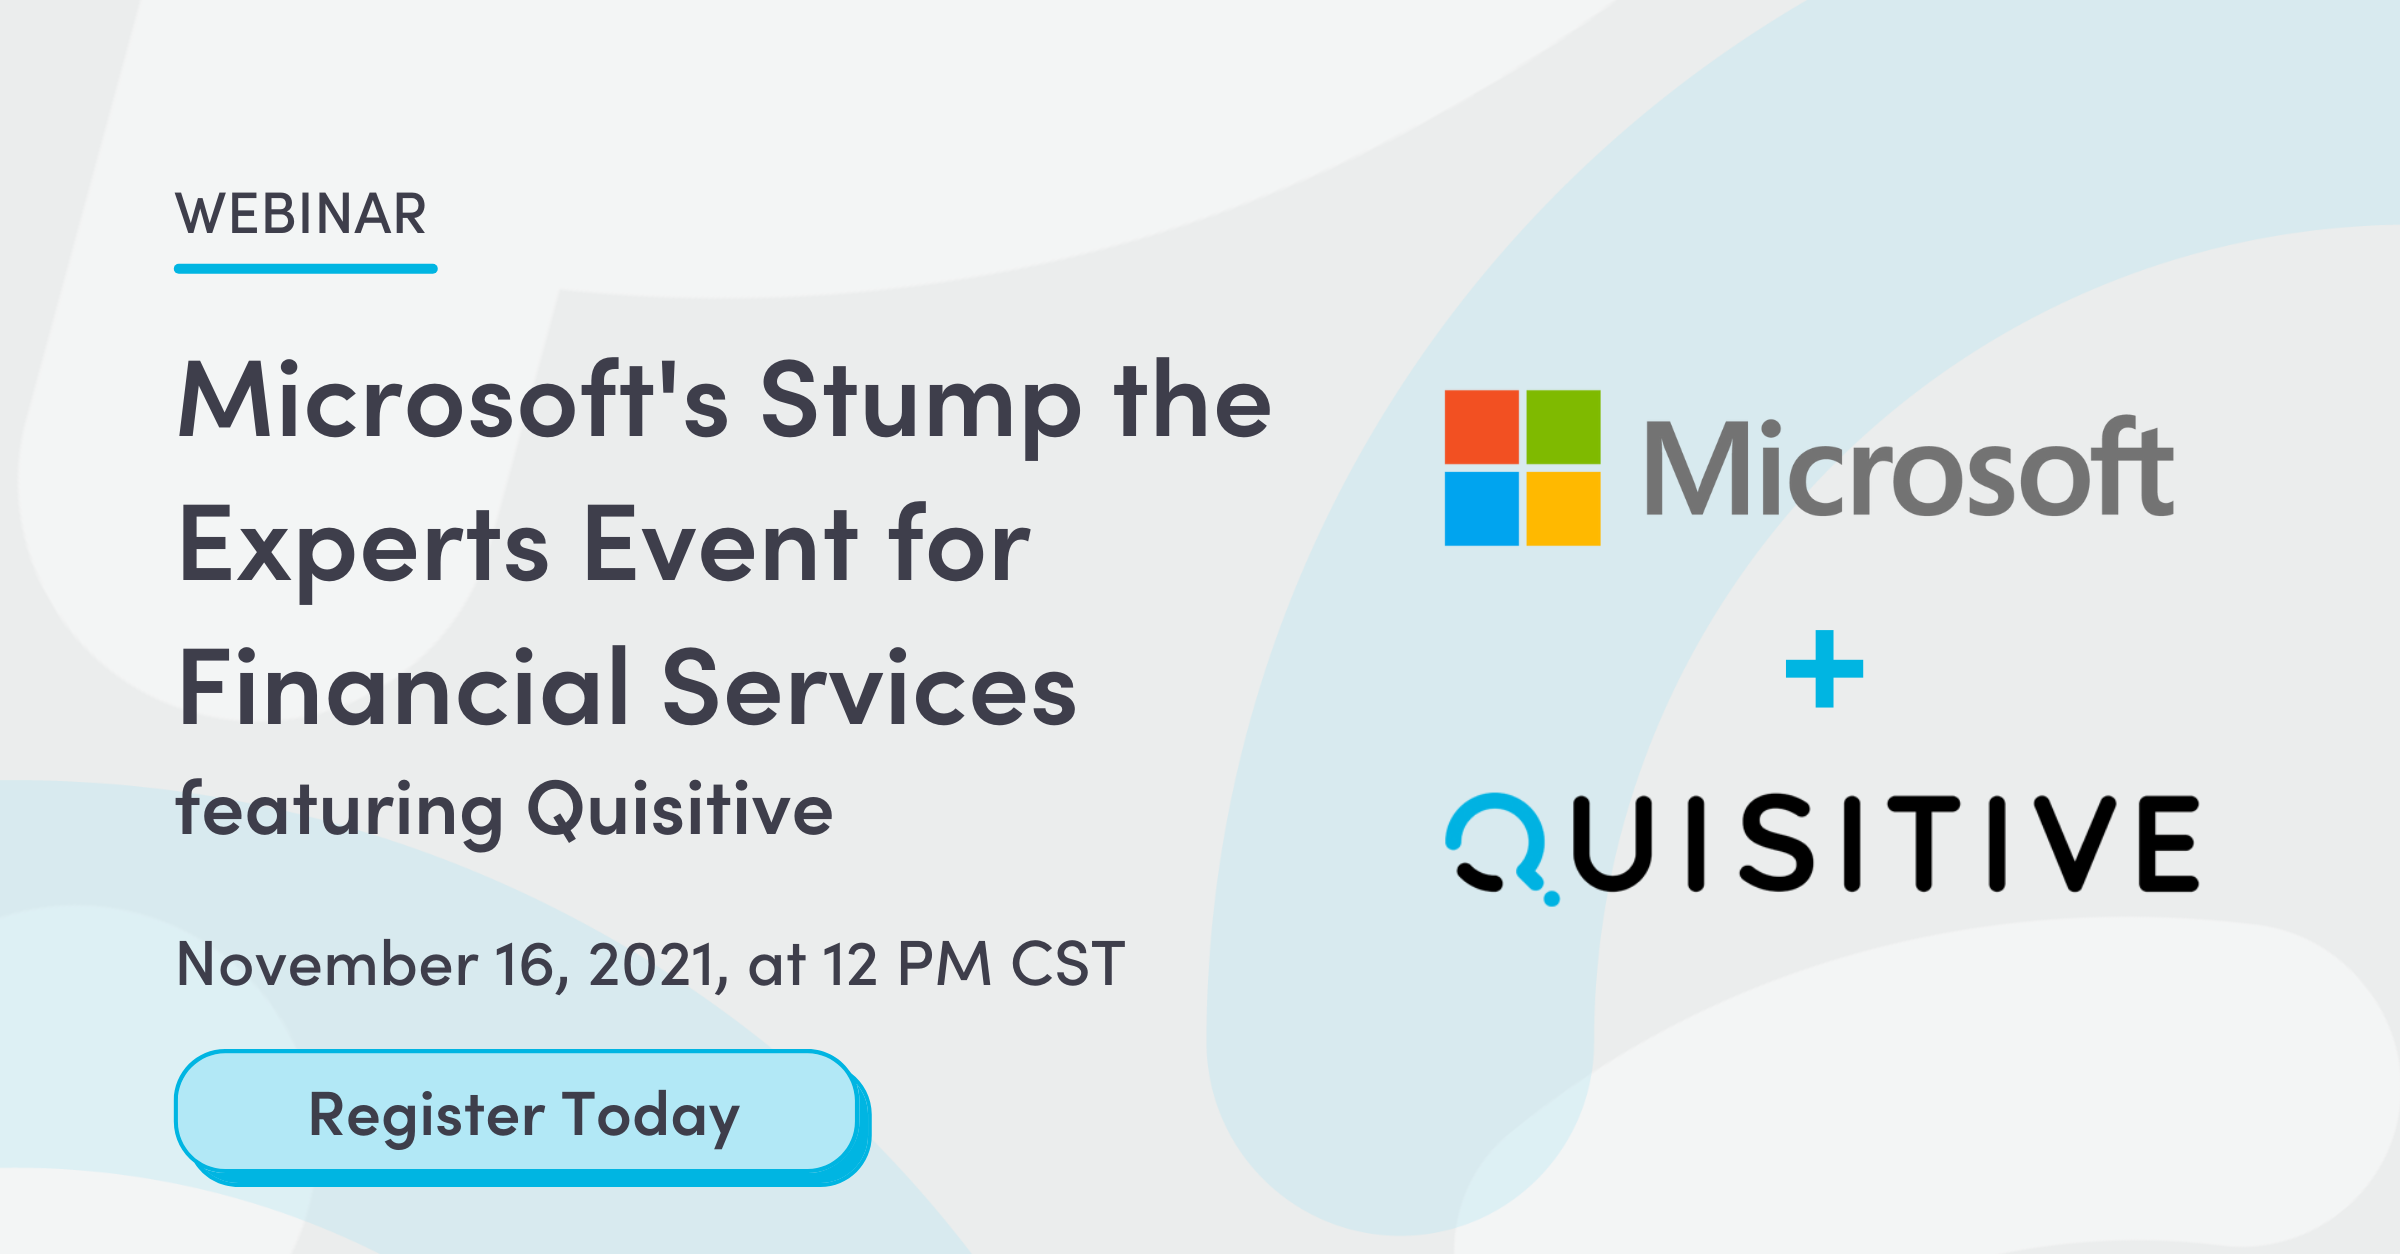 Microsoft Stump the Experts: App Migration and Modernization for Financial Services